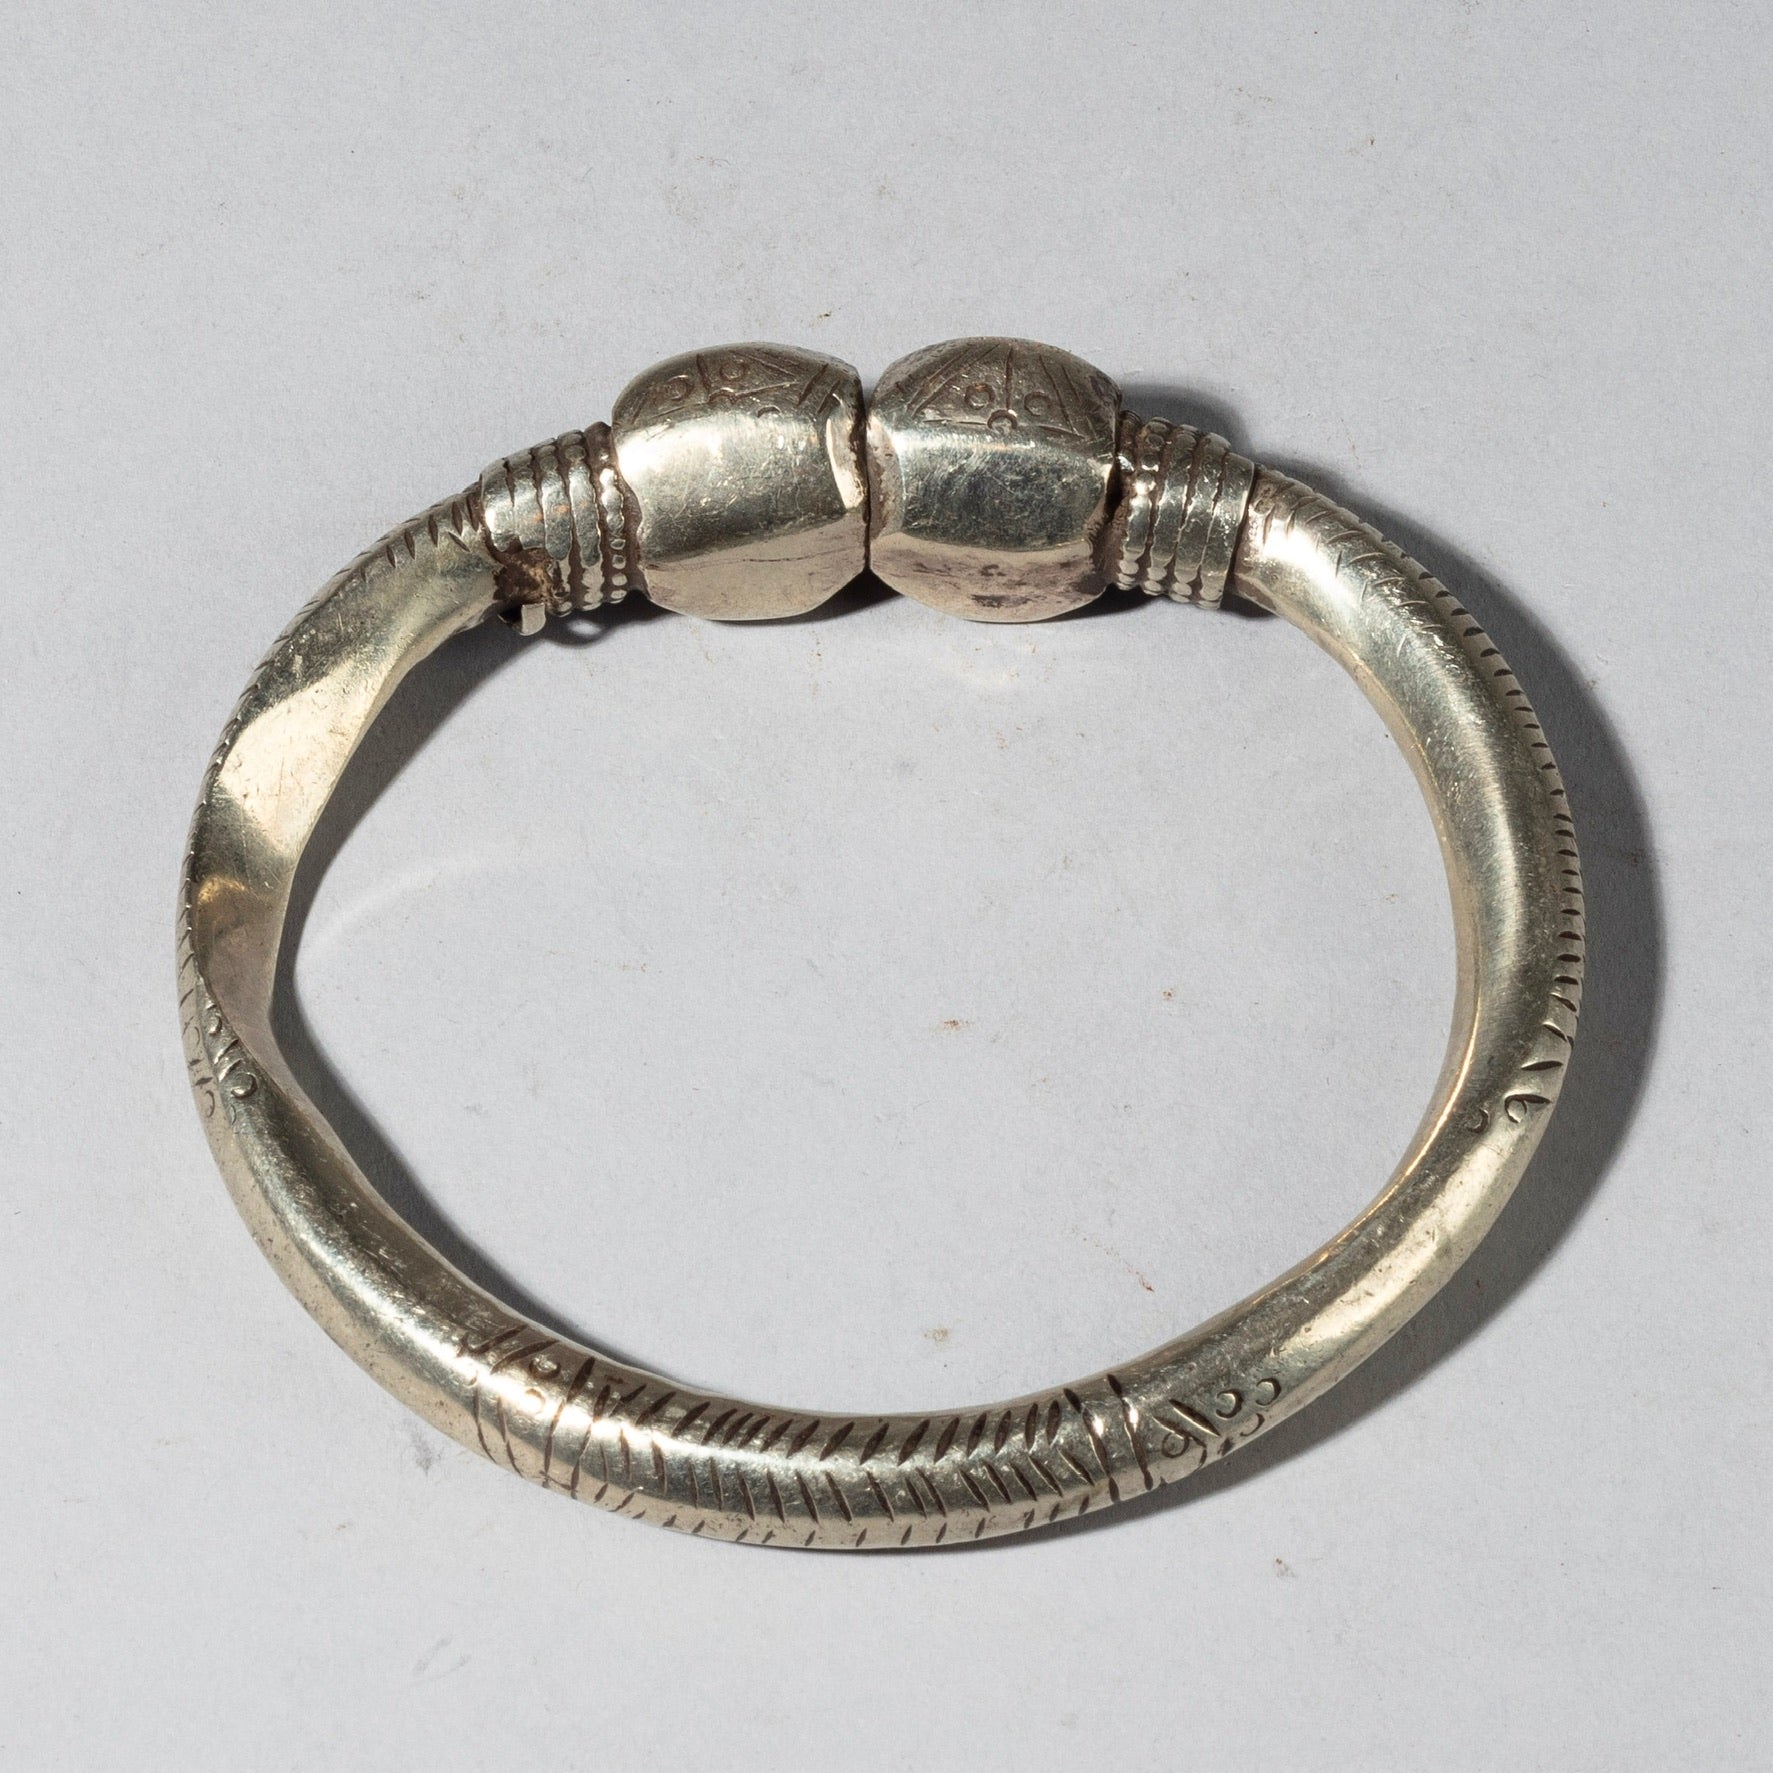 A 19THC SILVER ANKLET FROM ETHIOPIA WITH EXCELLENT WEAR, E. AFRICA (No 4348)